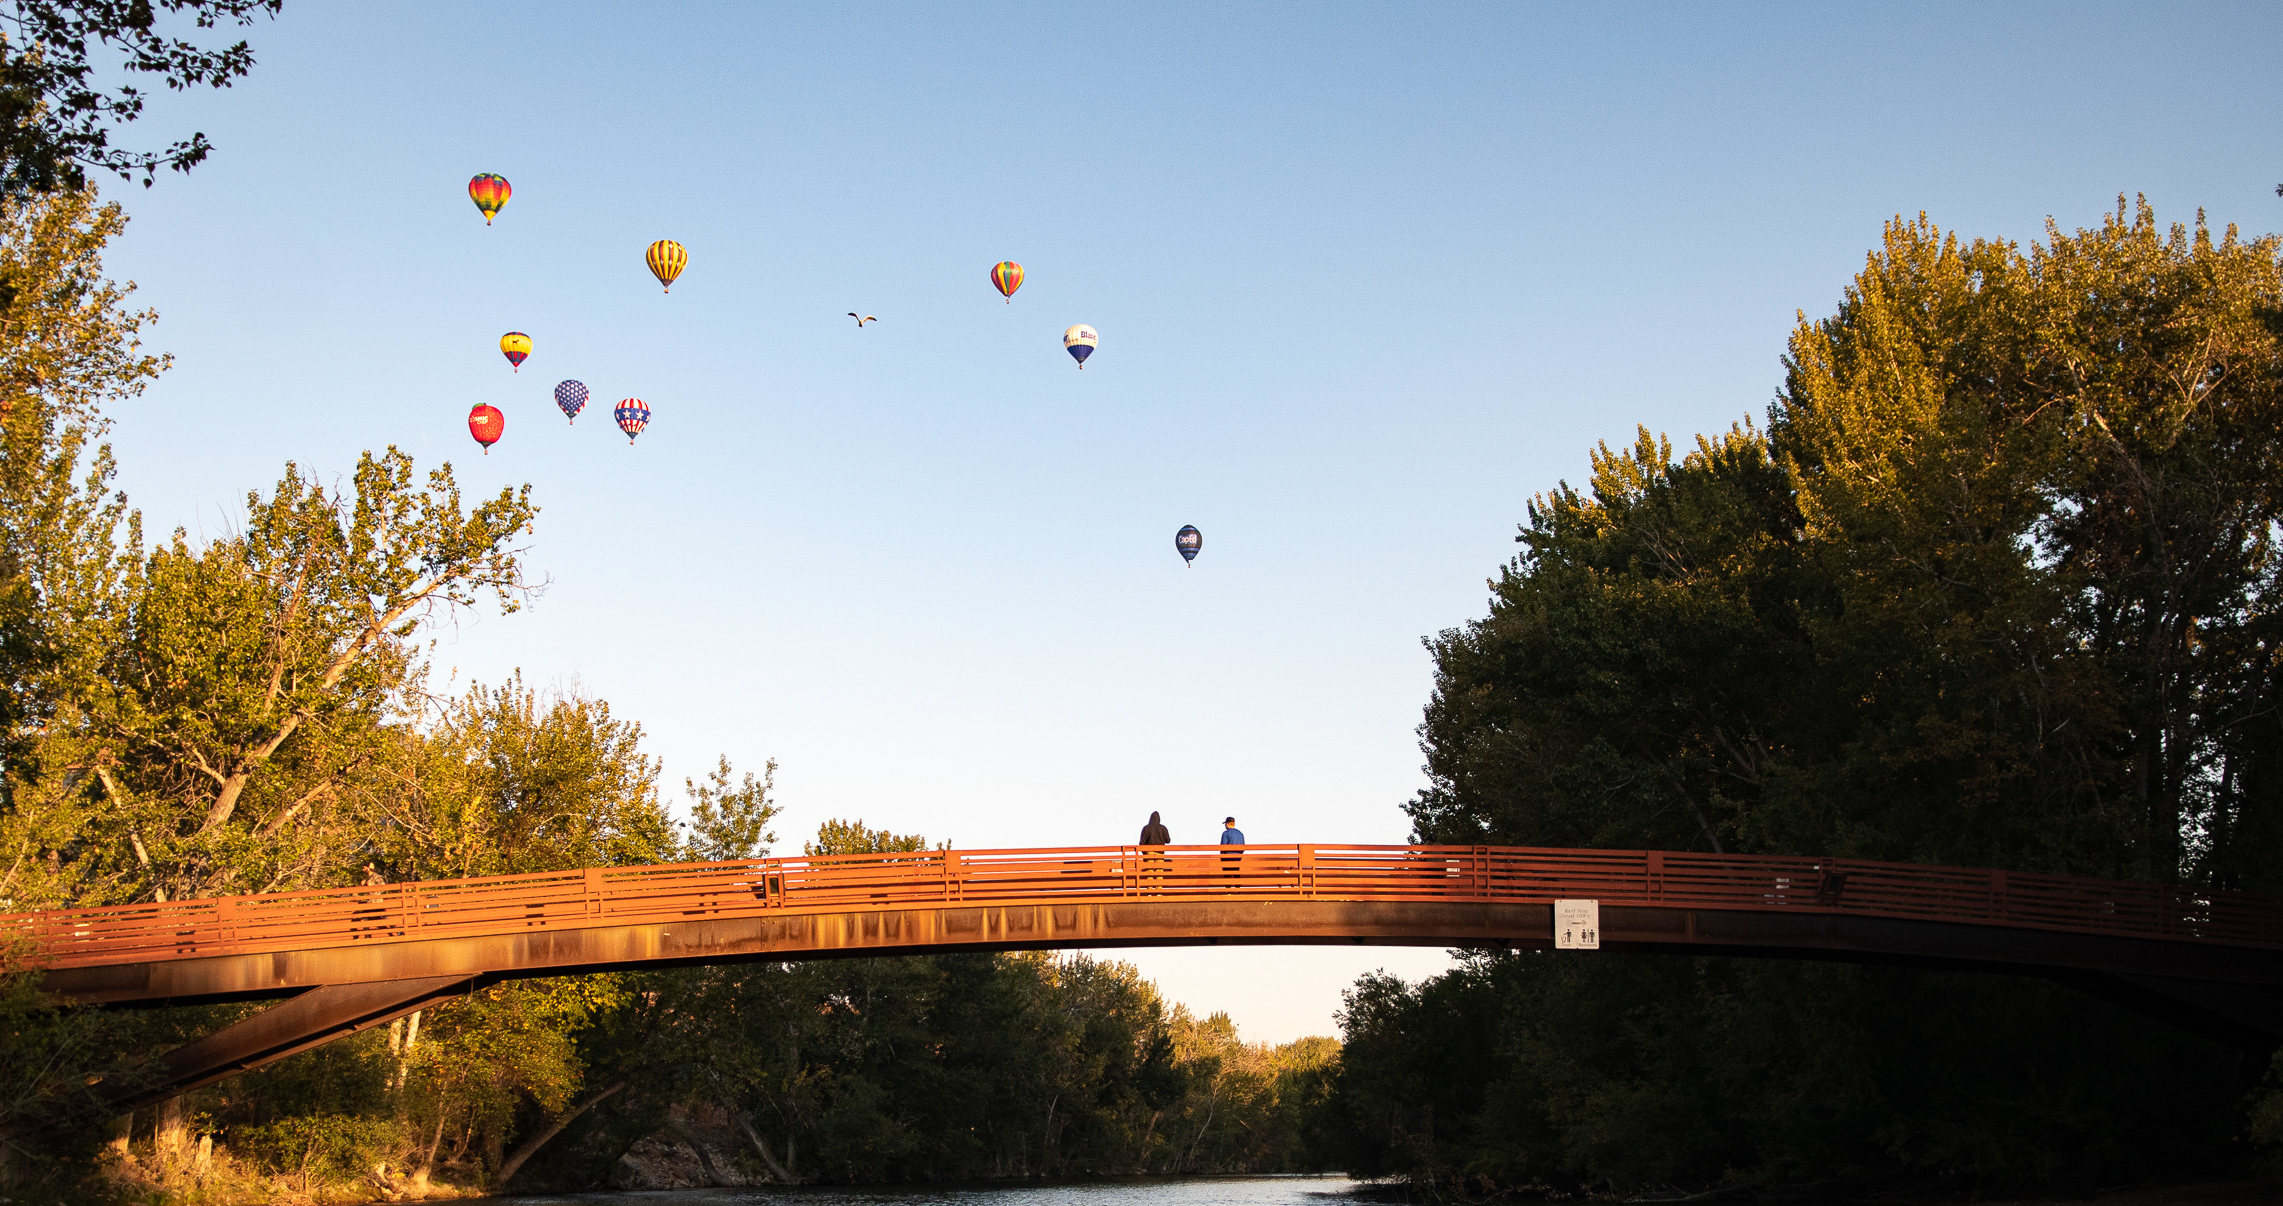 hot air balloons float over friendship bridge on a clear morning